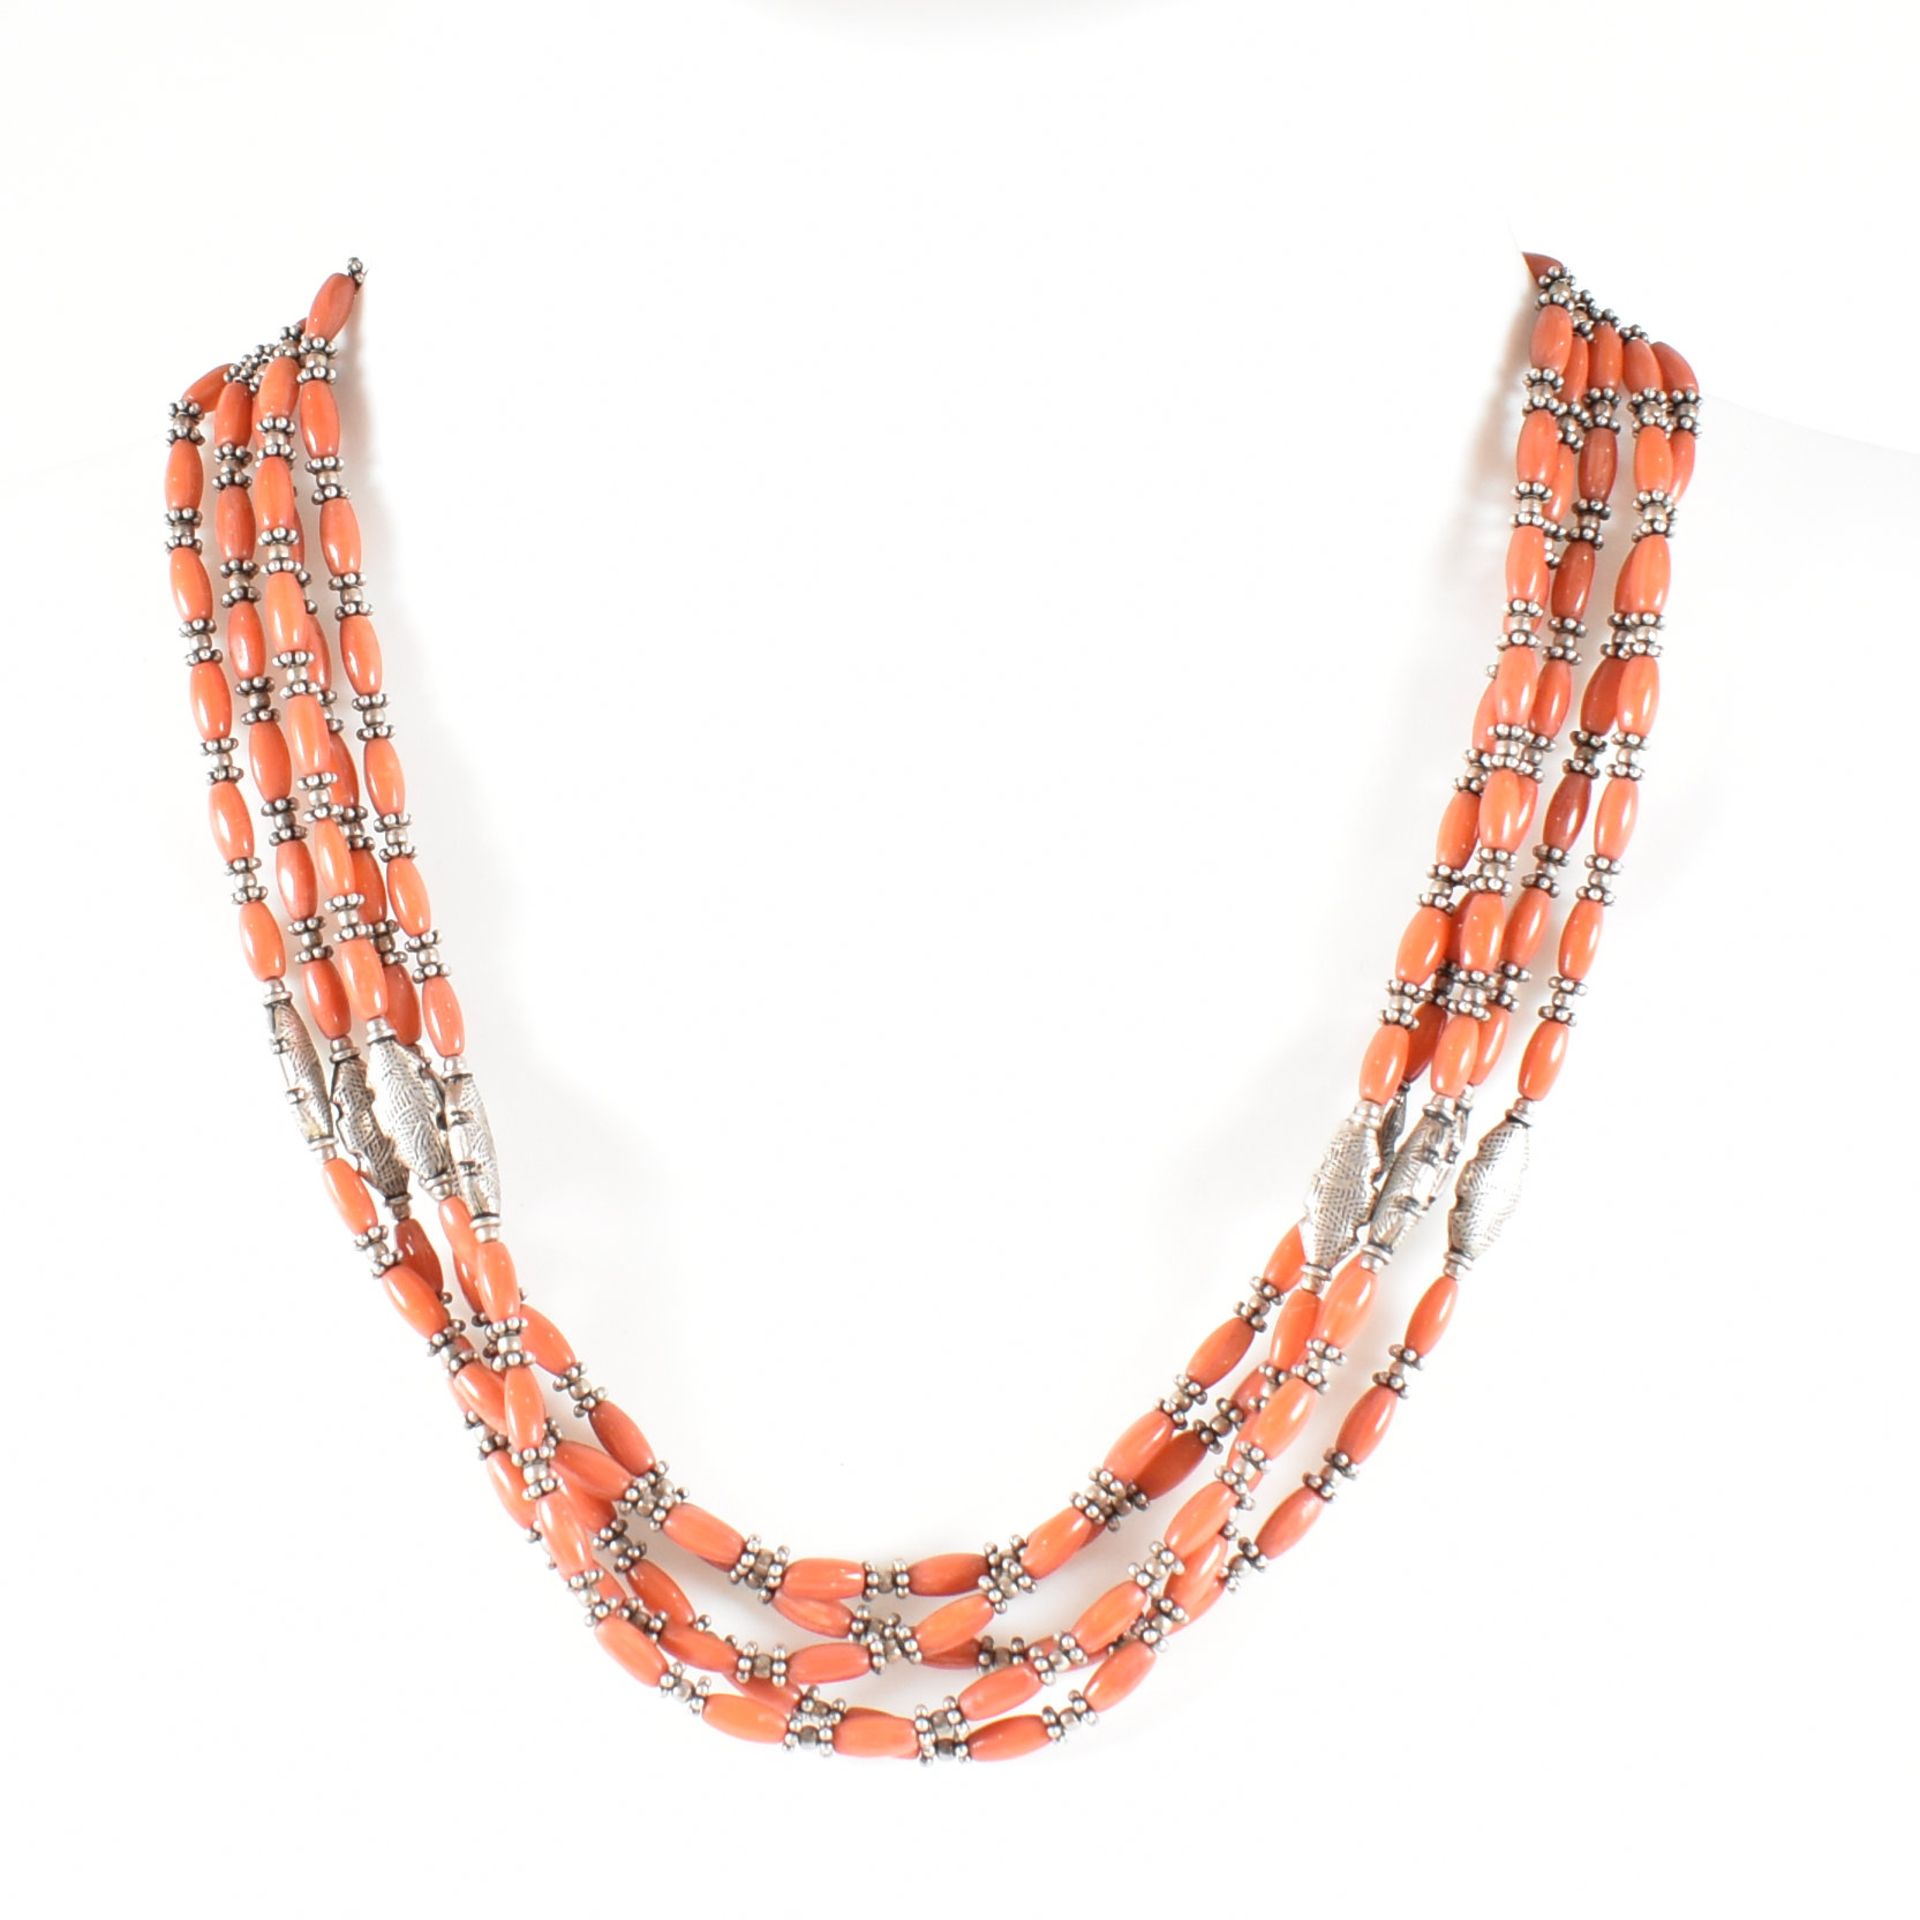 925 SILVER & CORAL 5 STRAND BEADED NECKLACE - Image 2 of 5